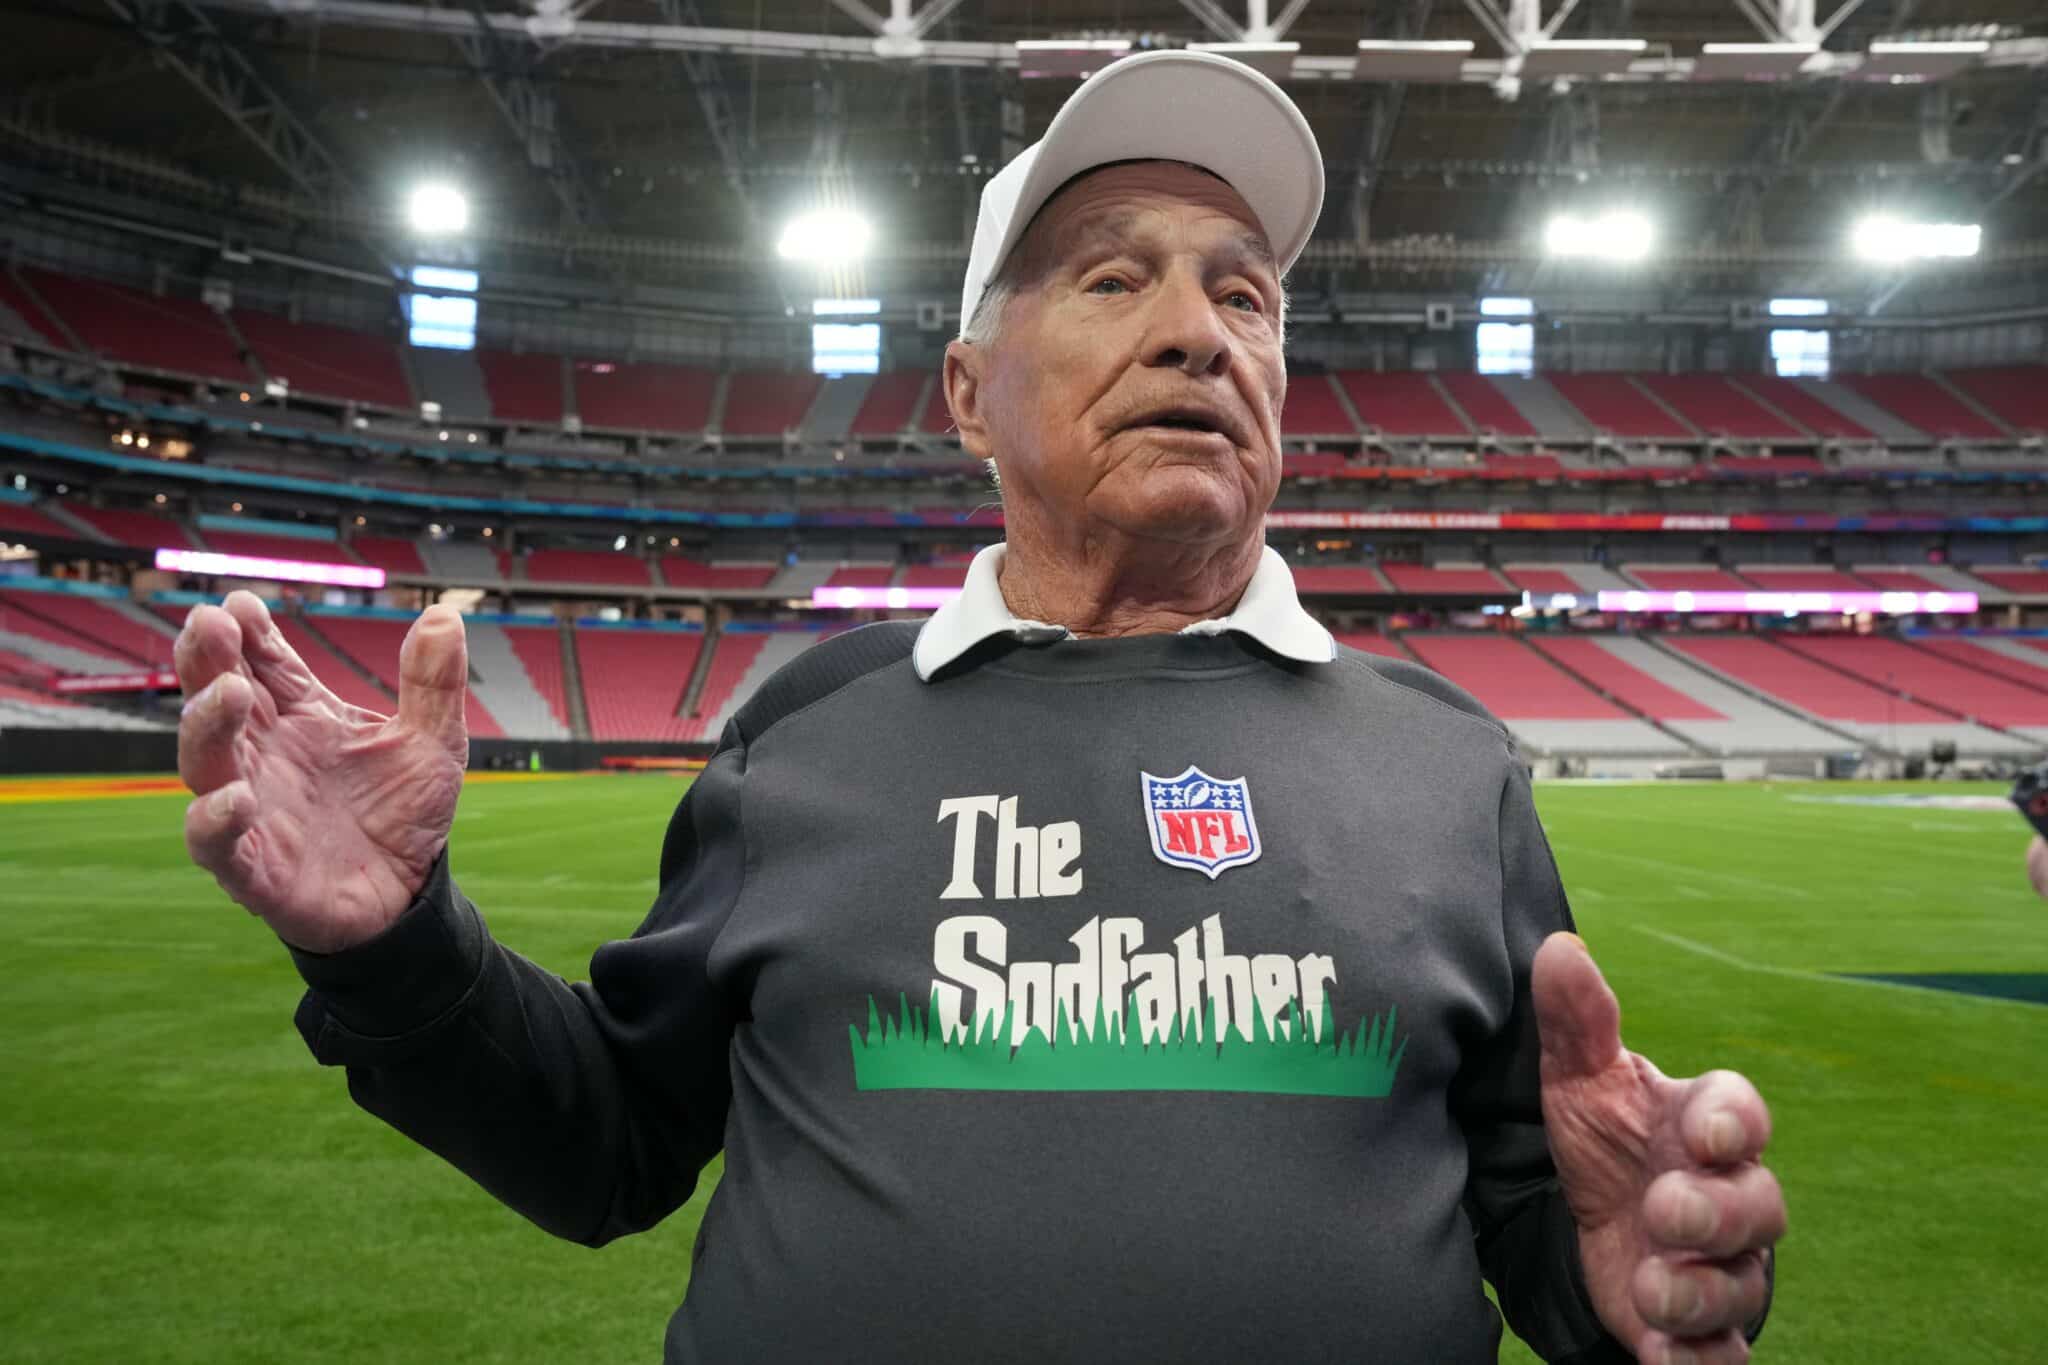 The Super Bowl Groundskeeper is a Chiefs Fan and Retired After the Game (a Conspiracy Theory)